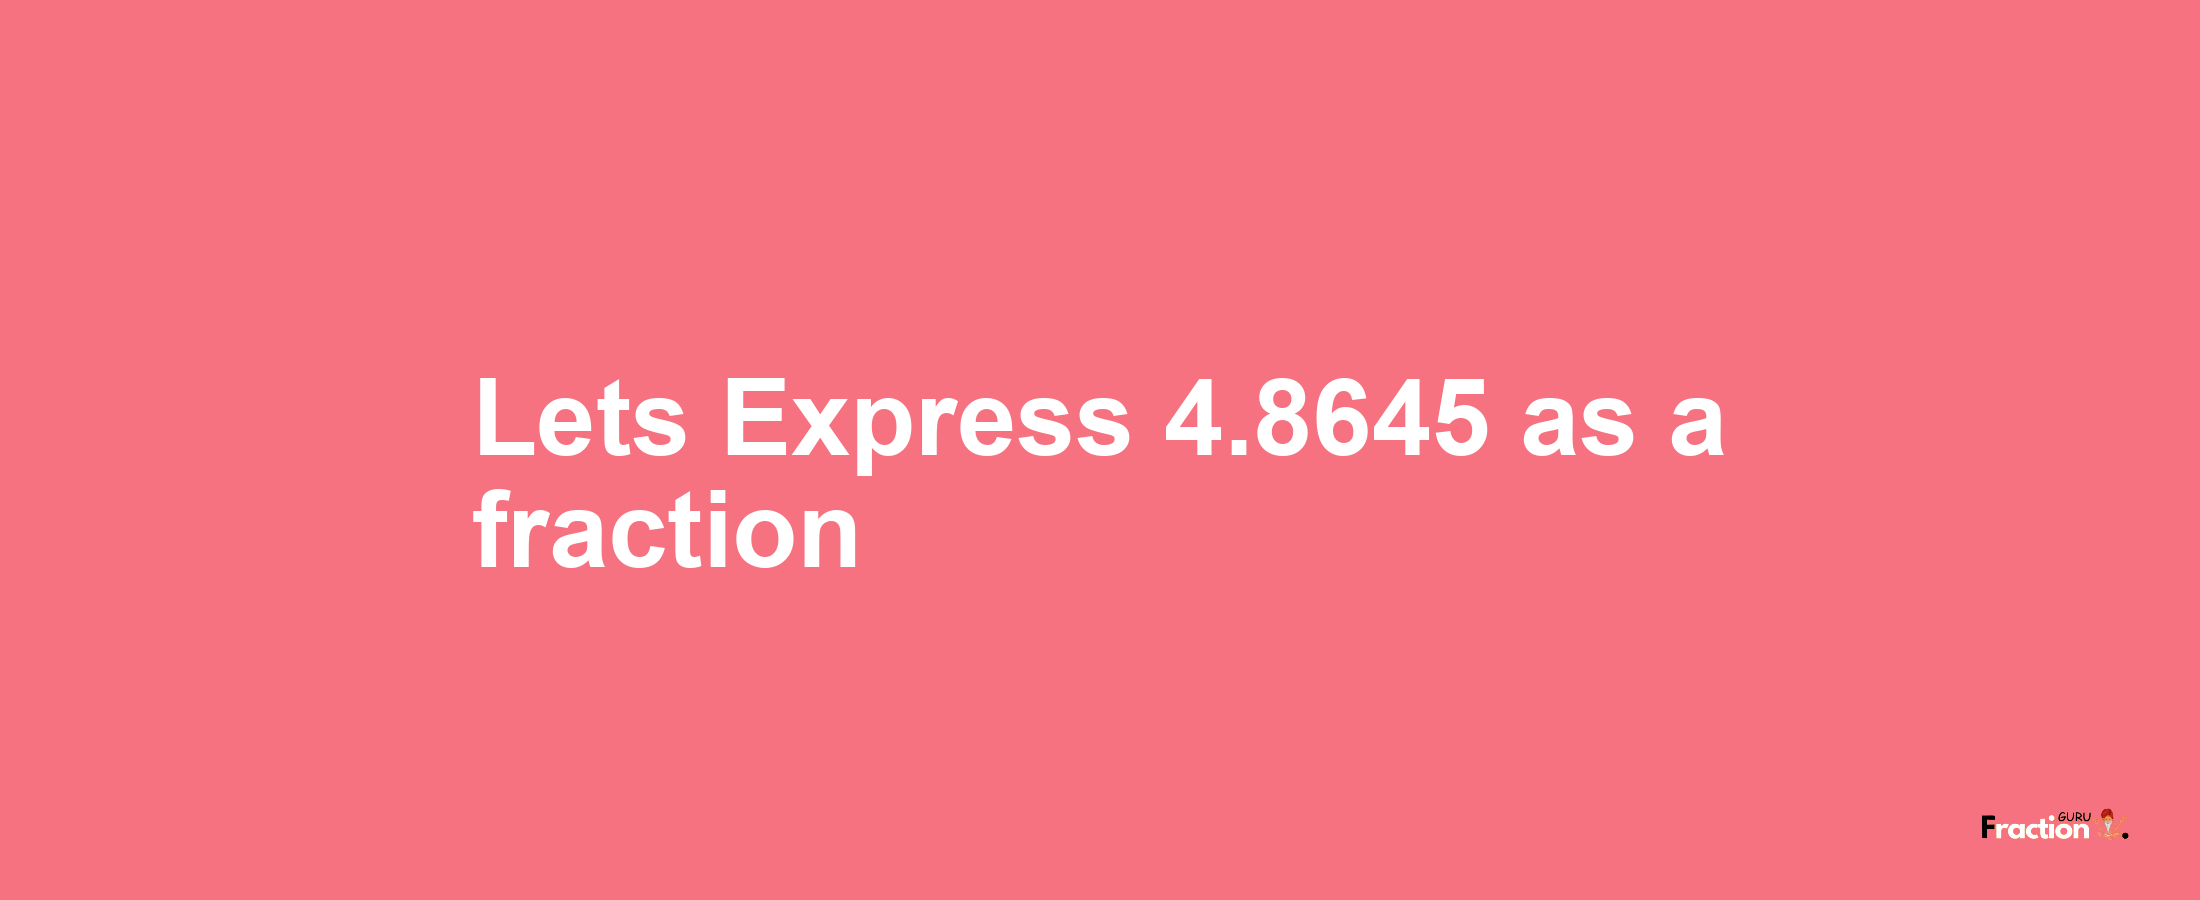 Lets Express 4.8645 as afraction